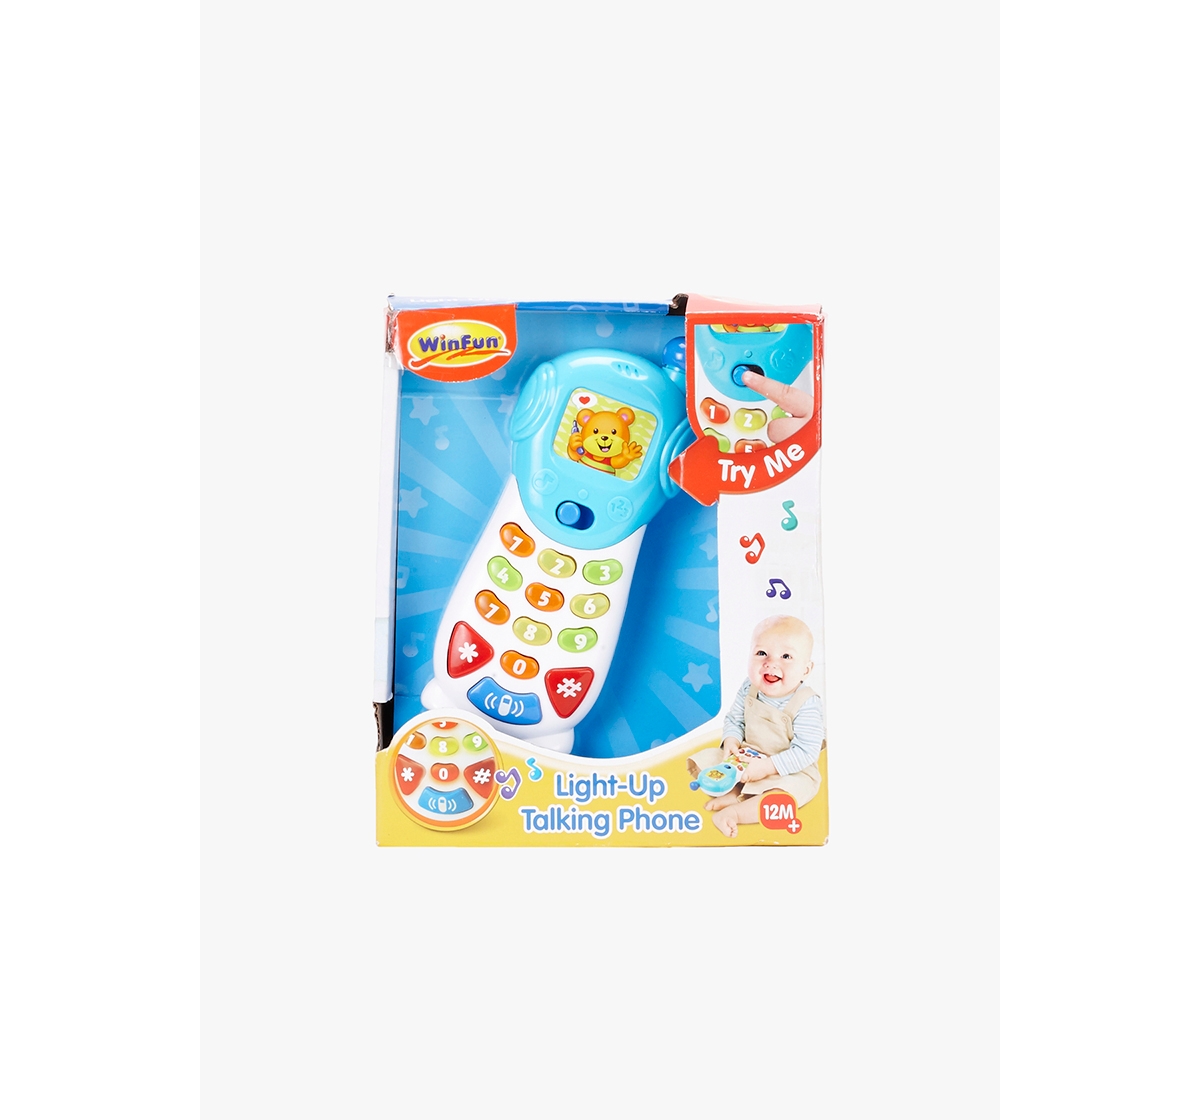 WinFun | Winfun Lightup Talking Phone Learning Toys for Kids age 12M+ (Blue) 0